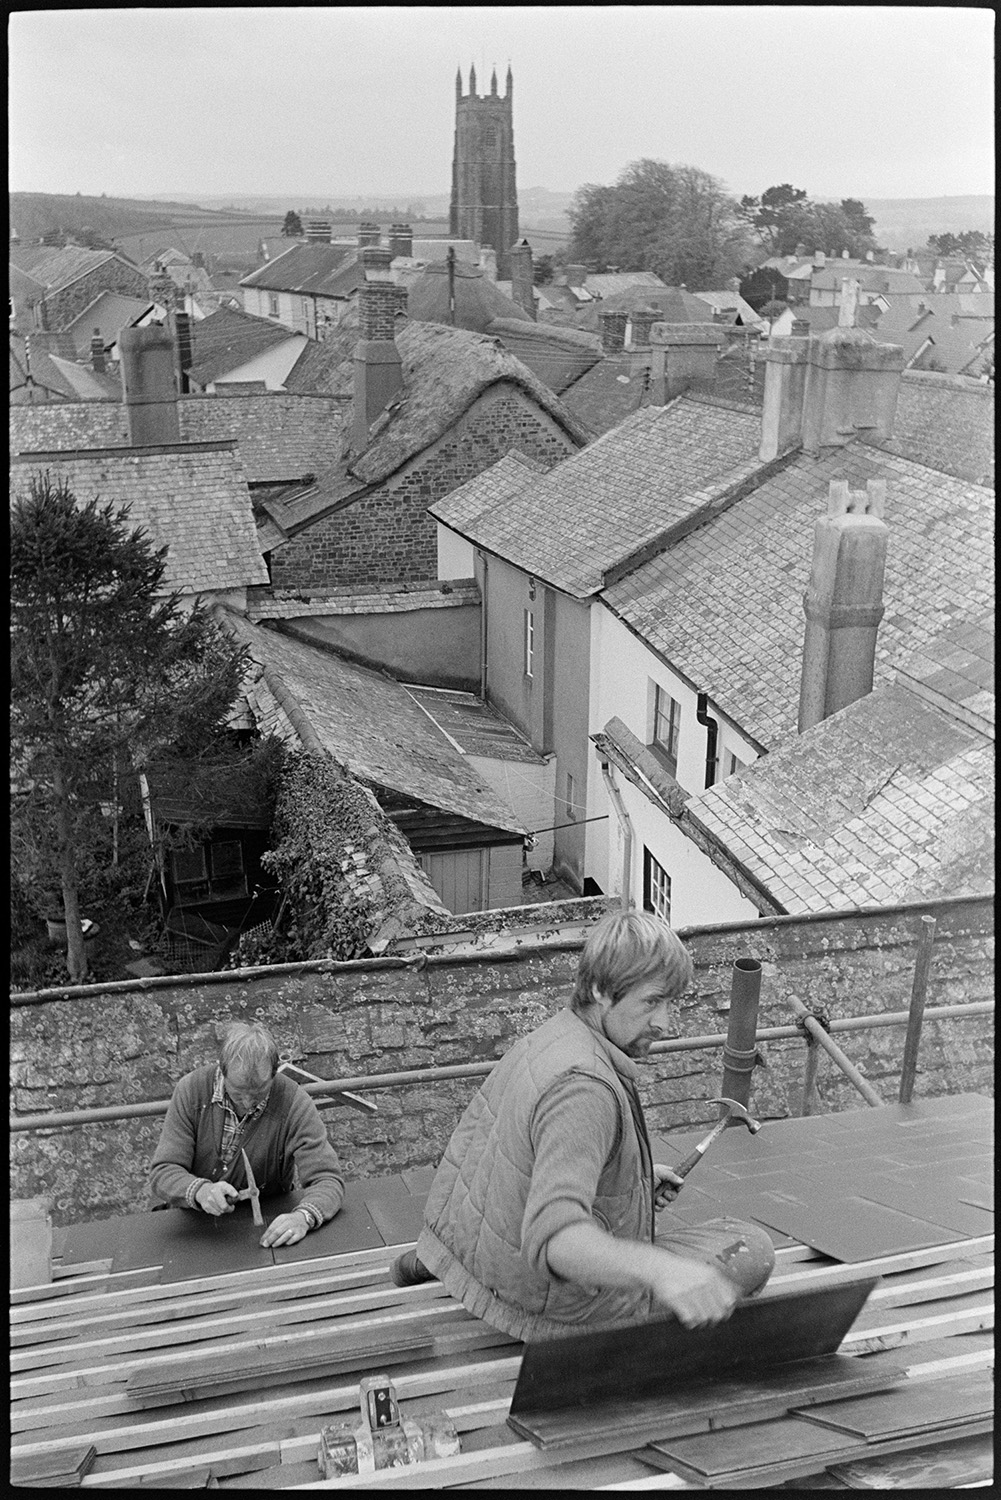 Man hanging slates with view over village with church tower. 
[Mike Hiscock, in the background, and another man hanging slates on a roof in Chulmleigh. Other rooftops and the church tower can be seen in the background.]